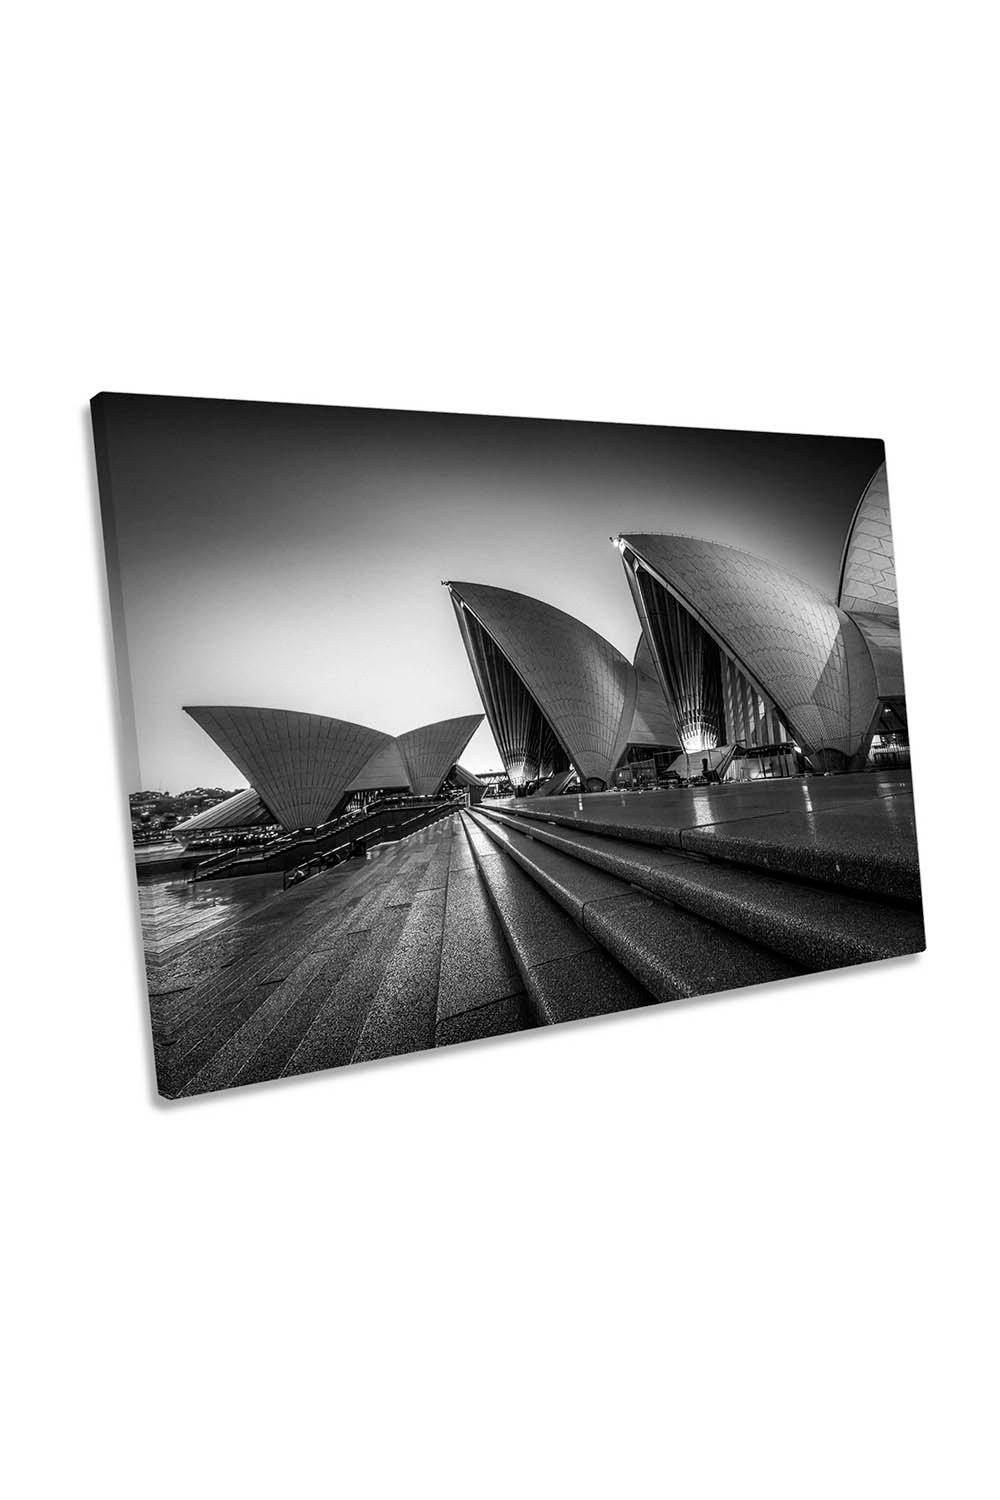 Sydney Opera House in Silhouette Canvas Wall Art Picture Print